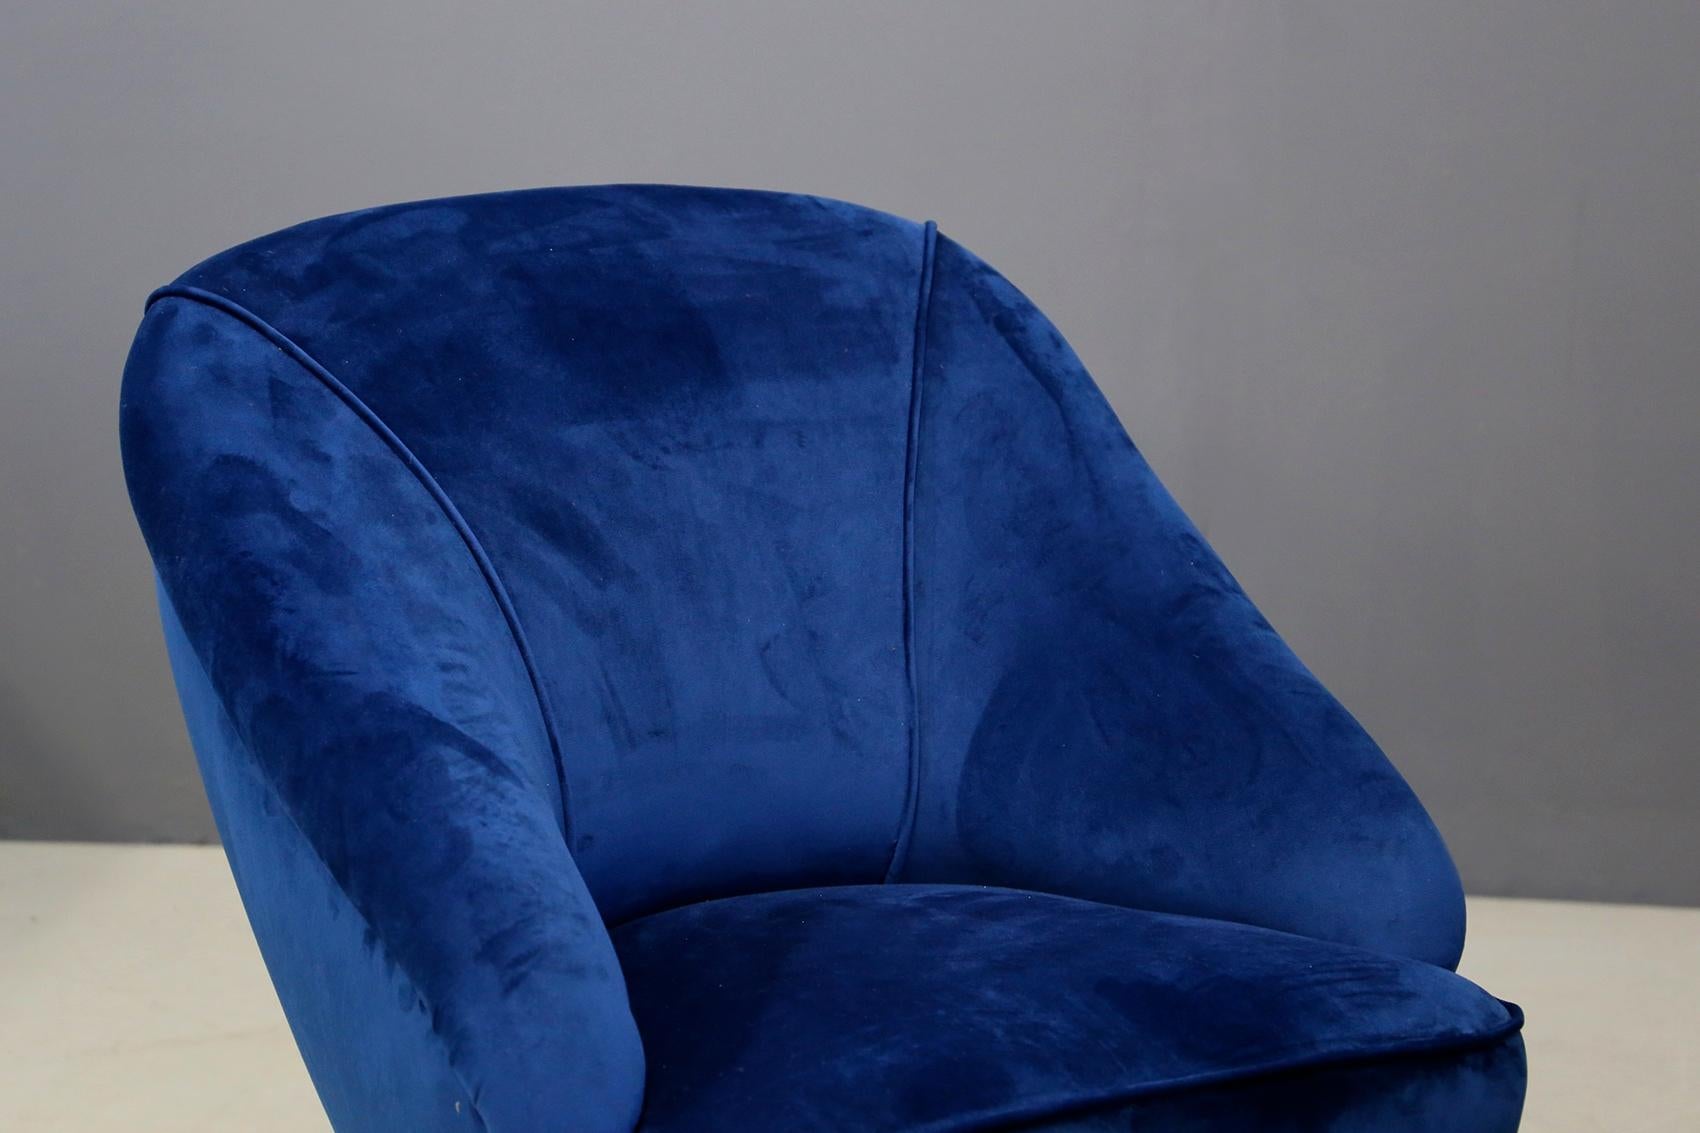 Mid-20th Century Gio Ponti attributed to Pair of Midcentury Armchairs in Blue Velvet, 1950s